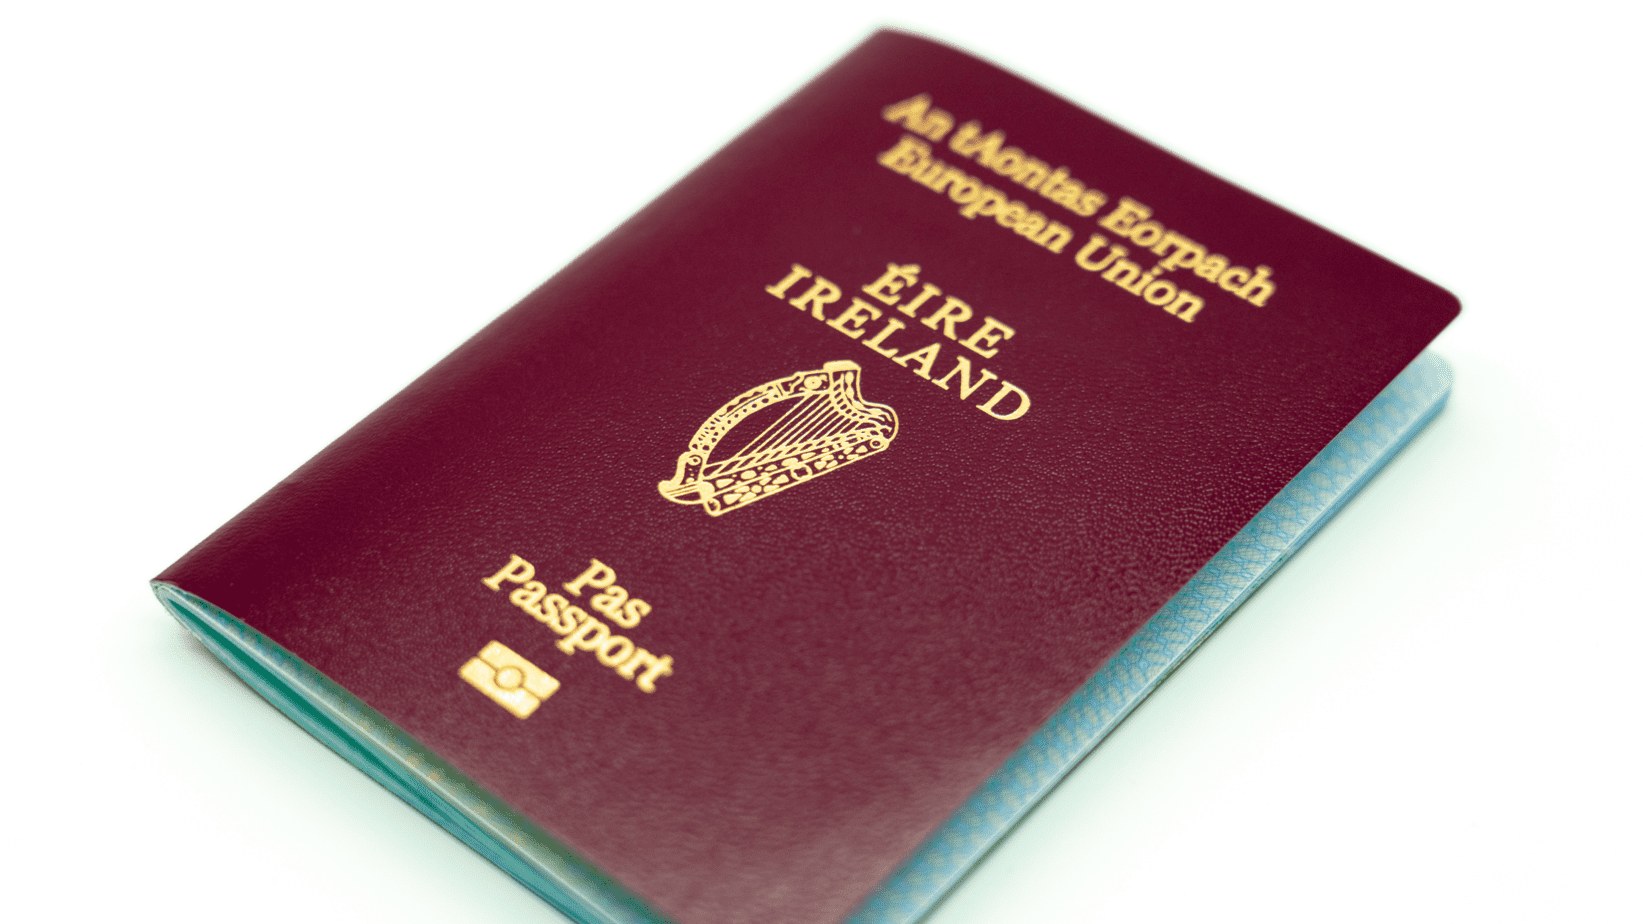 Most valuable passports in the world